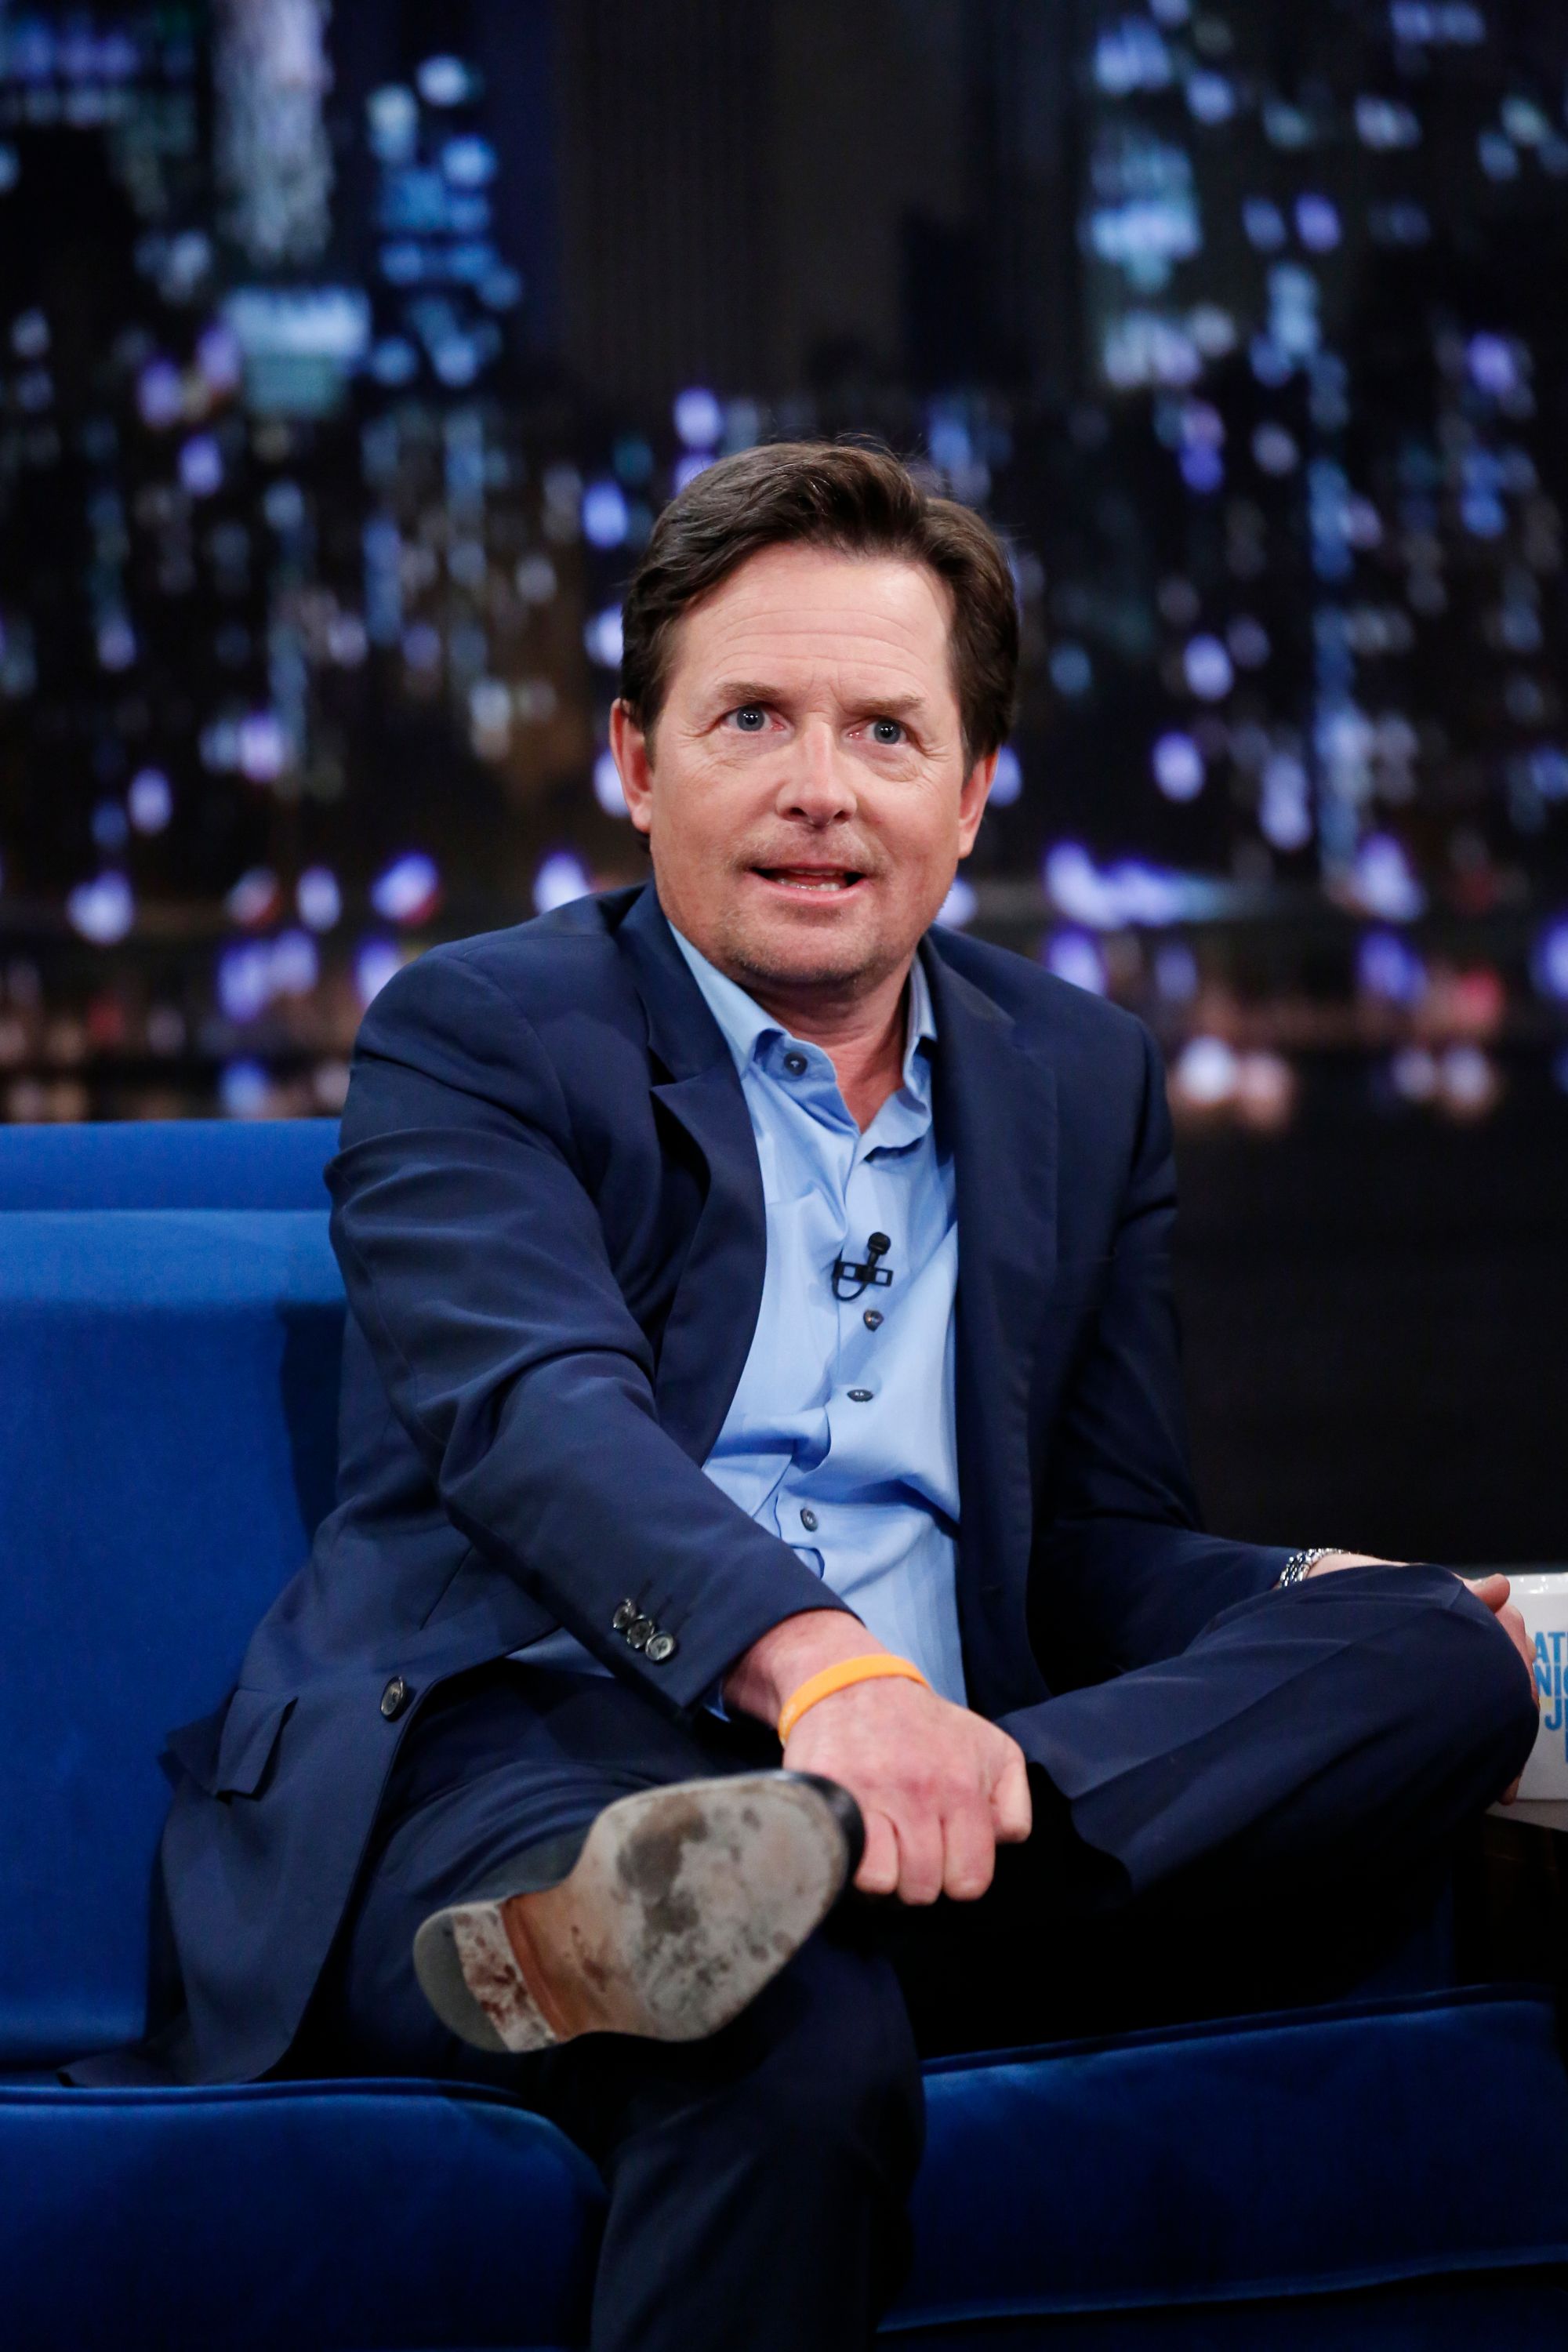 Michael J. Fox on season 5 of the "Late Night with Jimmy Fallon" on September 25, 2013 | Photo: Lloyd Bishop/NBCU Photo Bank/NBCUniversal/Getty Images